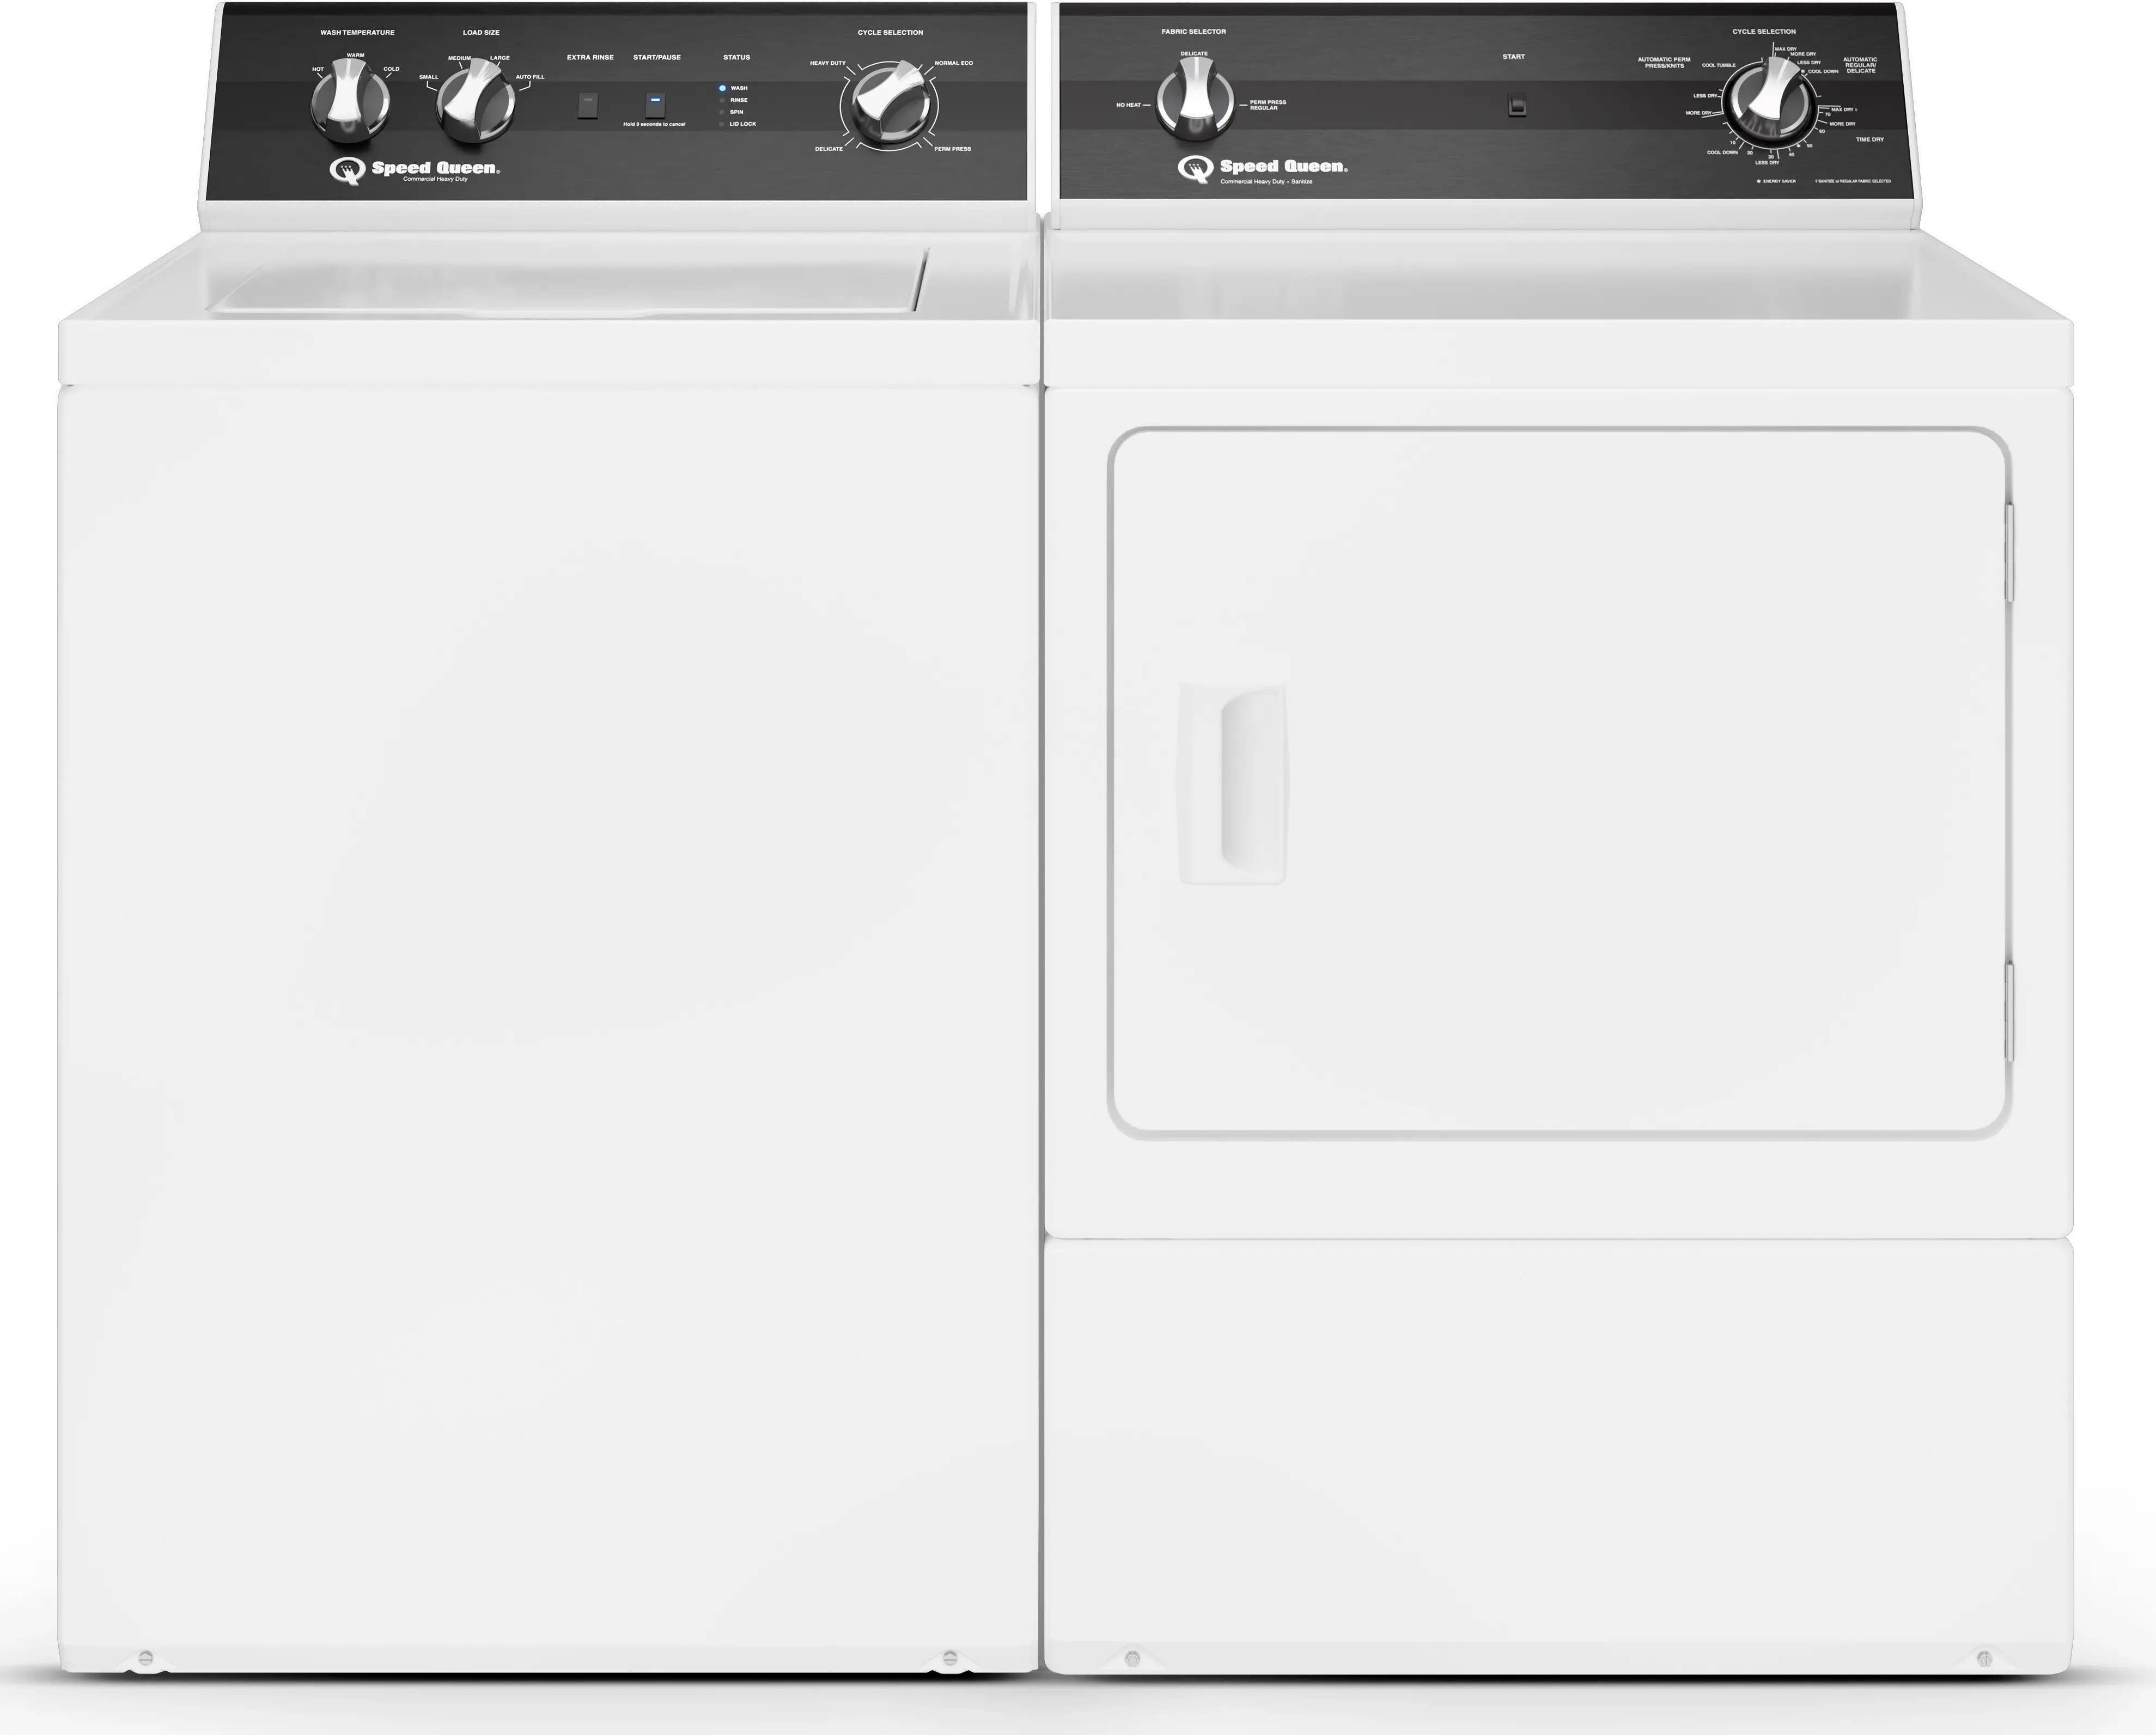 Speed Queen Electric Washer and Dryer Set - TR3, White